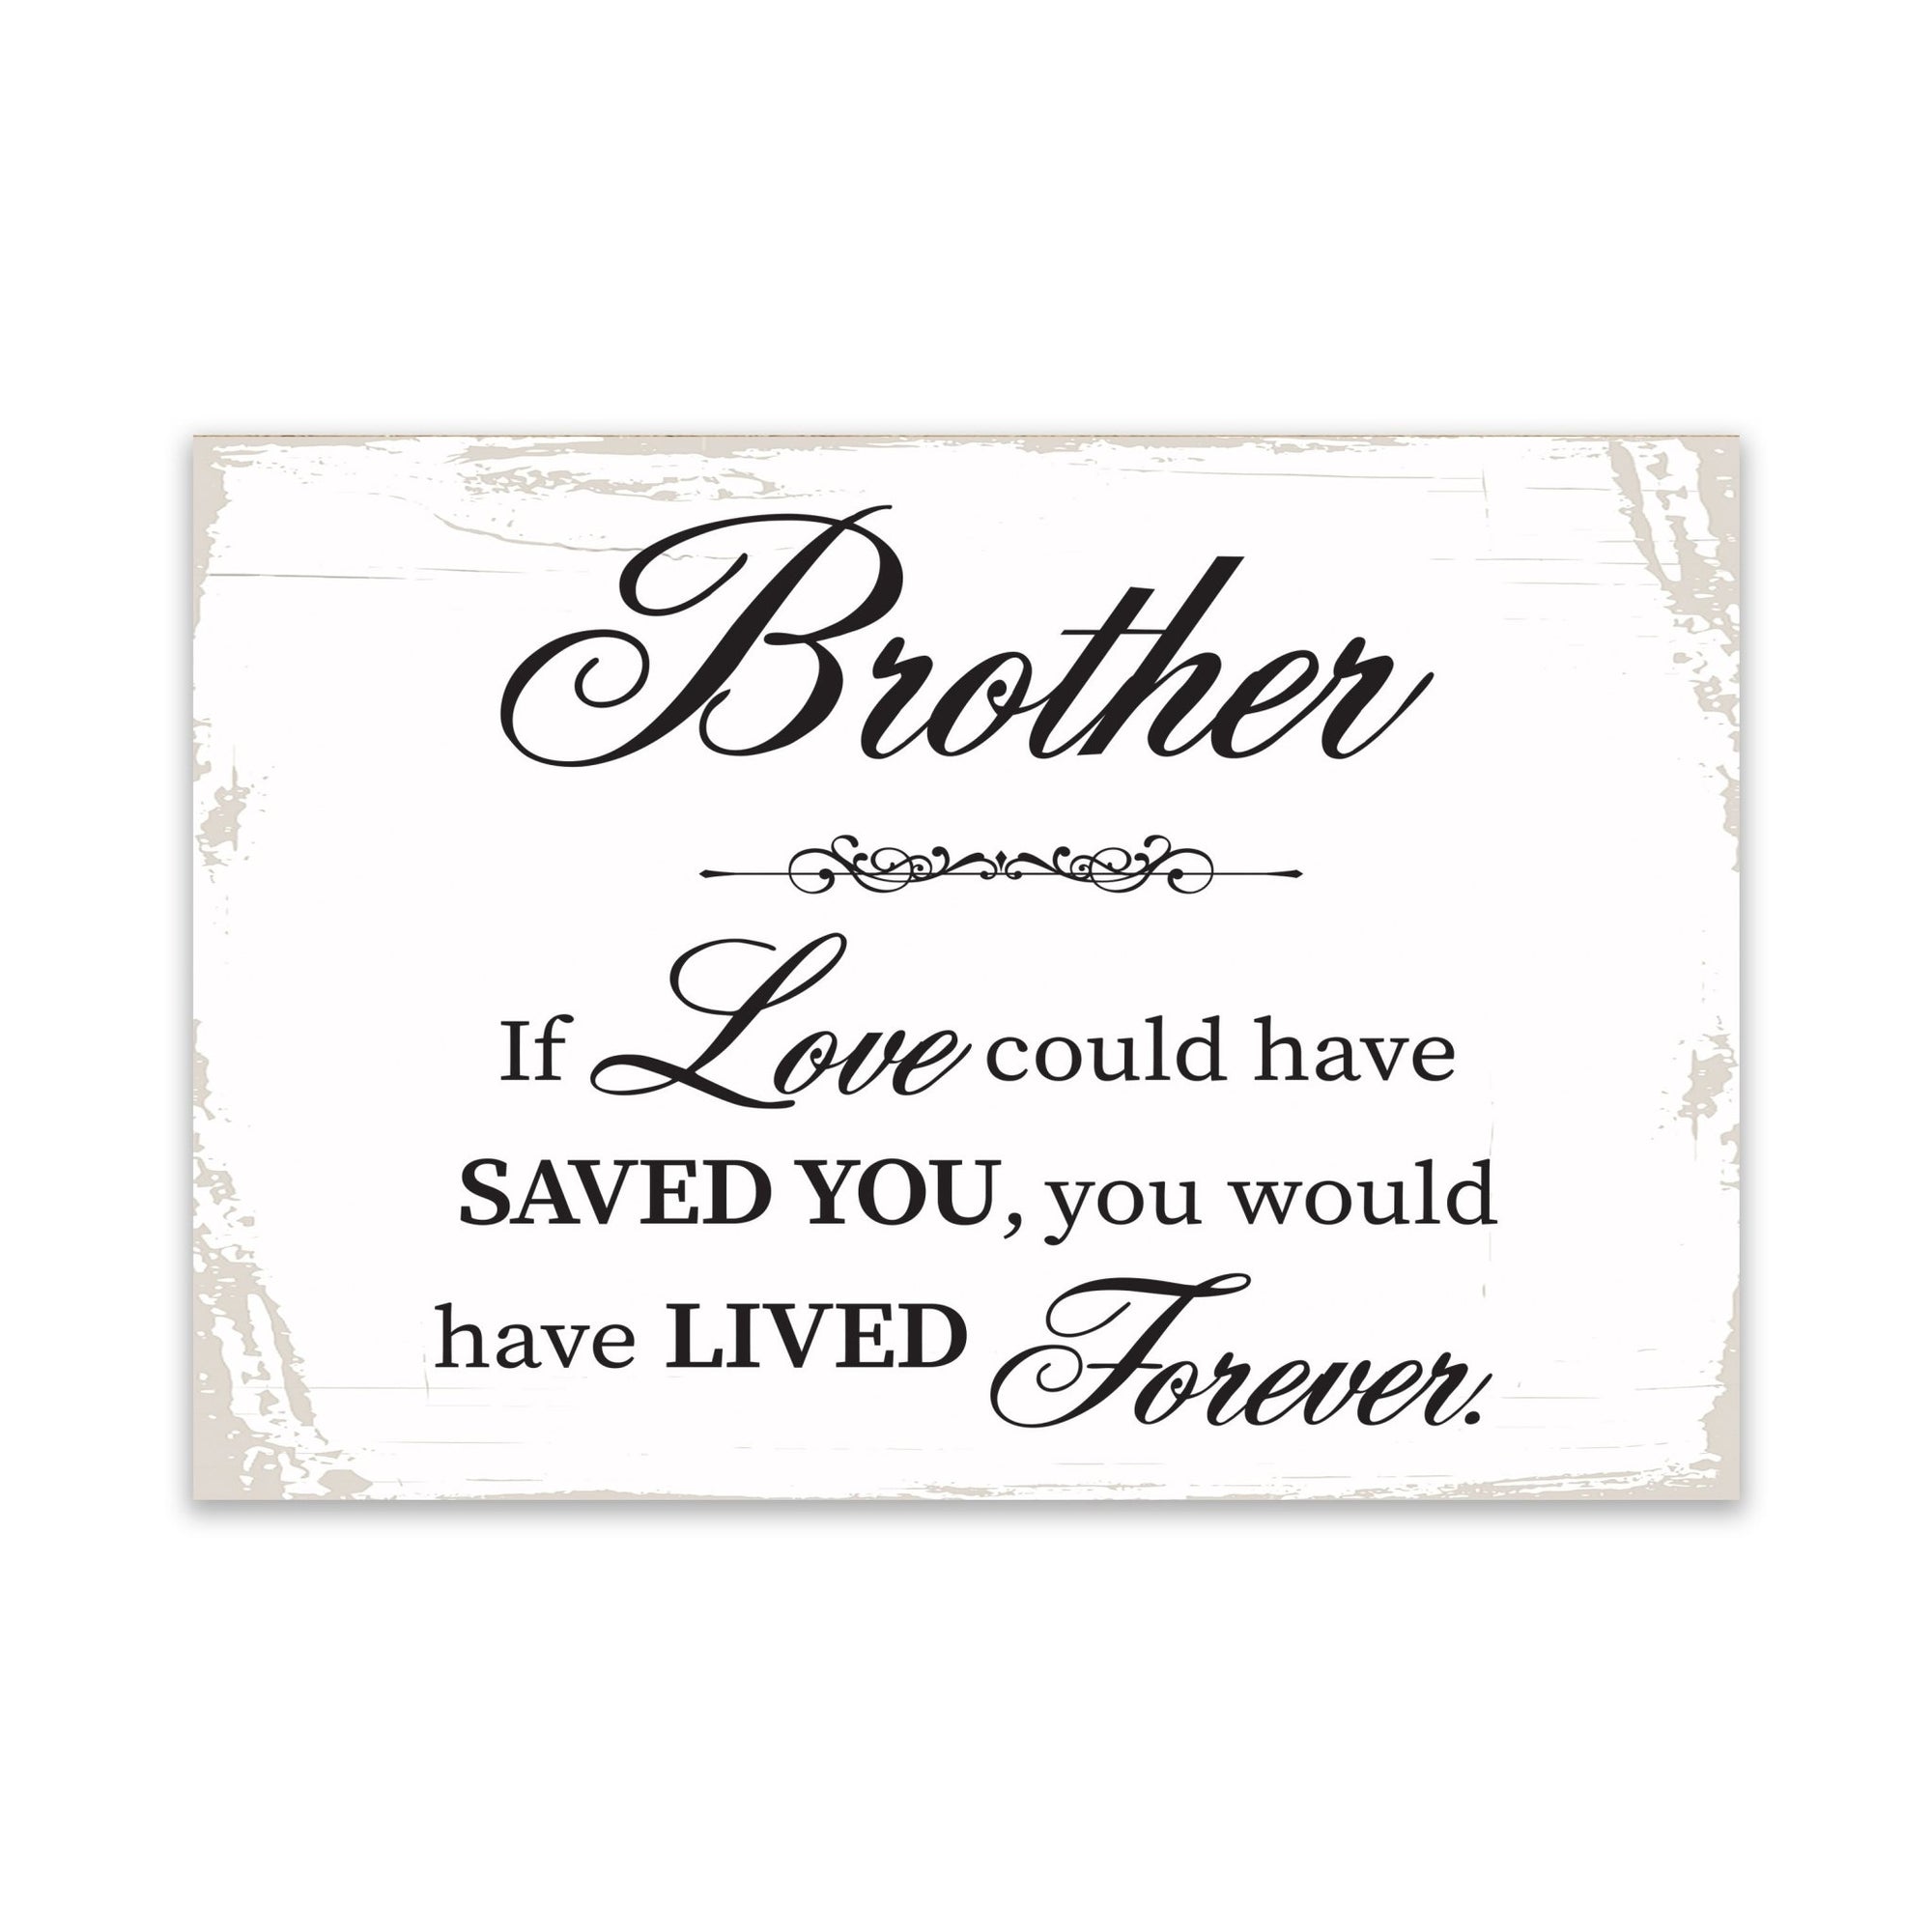 Modern Inspirational Memorial 5.5x 8 inches Wooden Sign Brother, If Love Could - Plaque Tabletop Decoration Loss of Loved One Bereavement Sympathy Keepsake - LifeSong Milestones